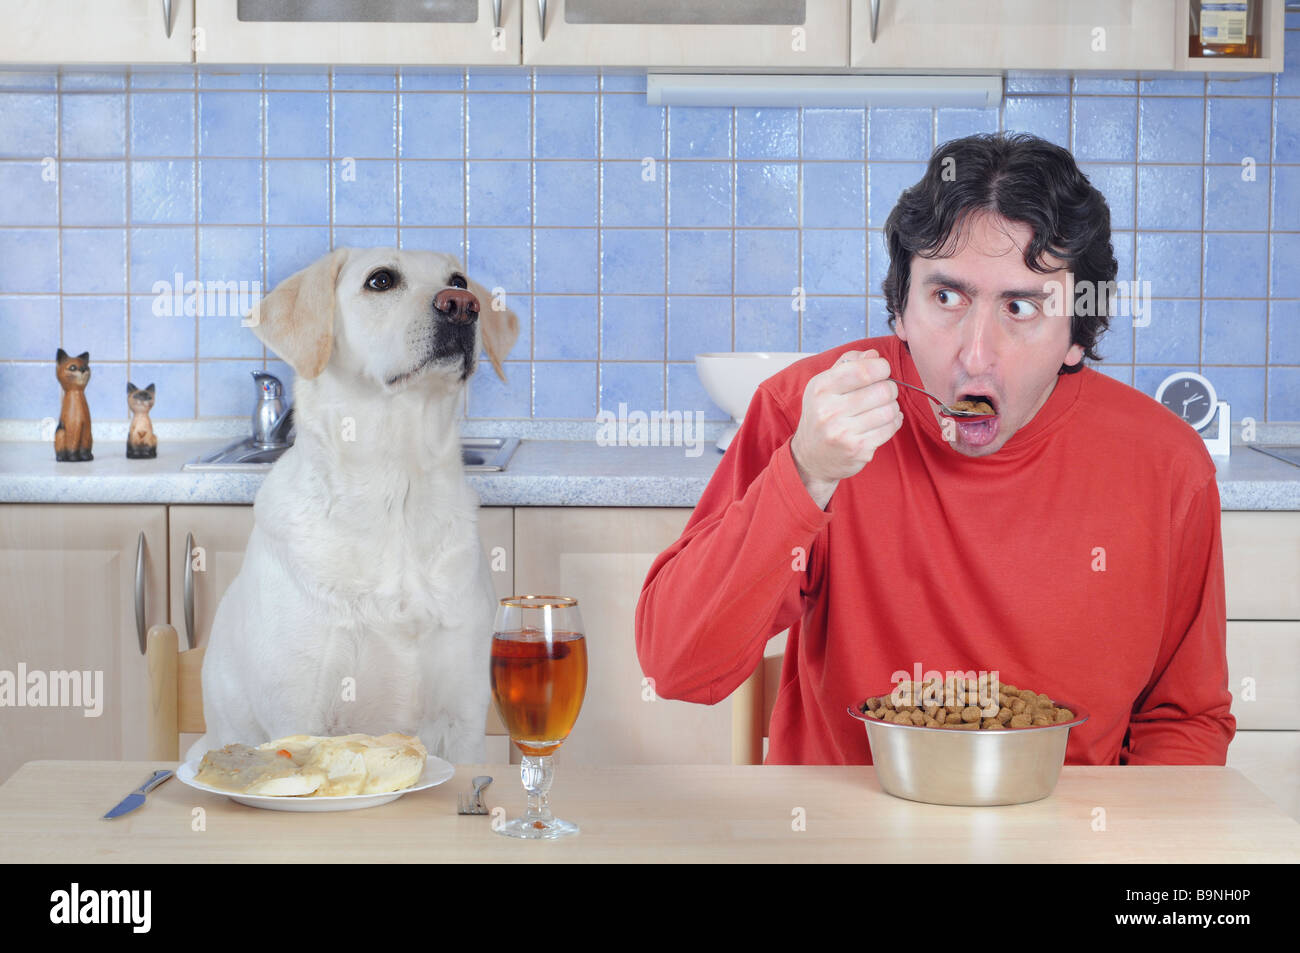 Role exchange - man and dog eating dinner. Stock Photo